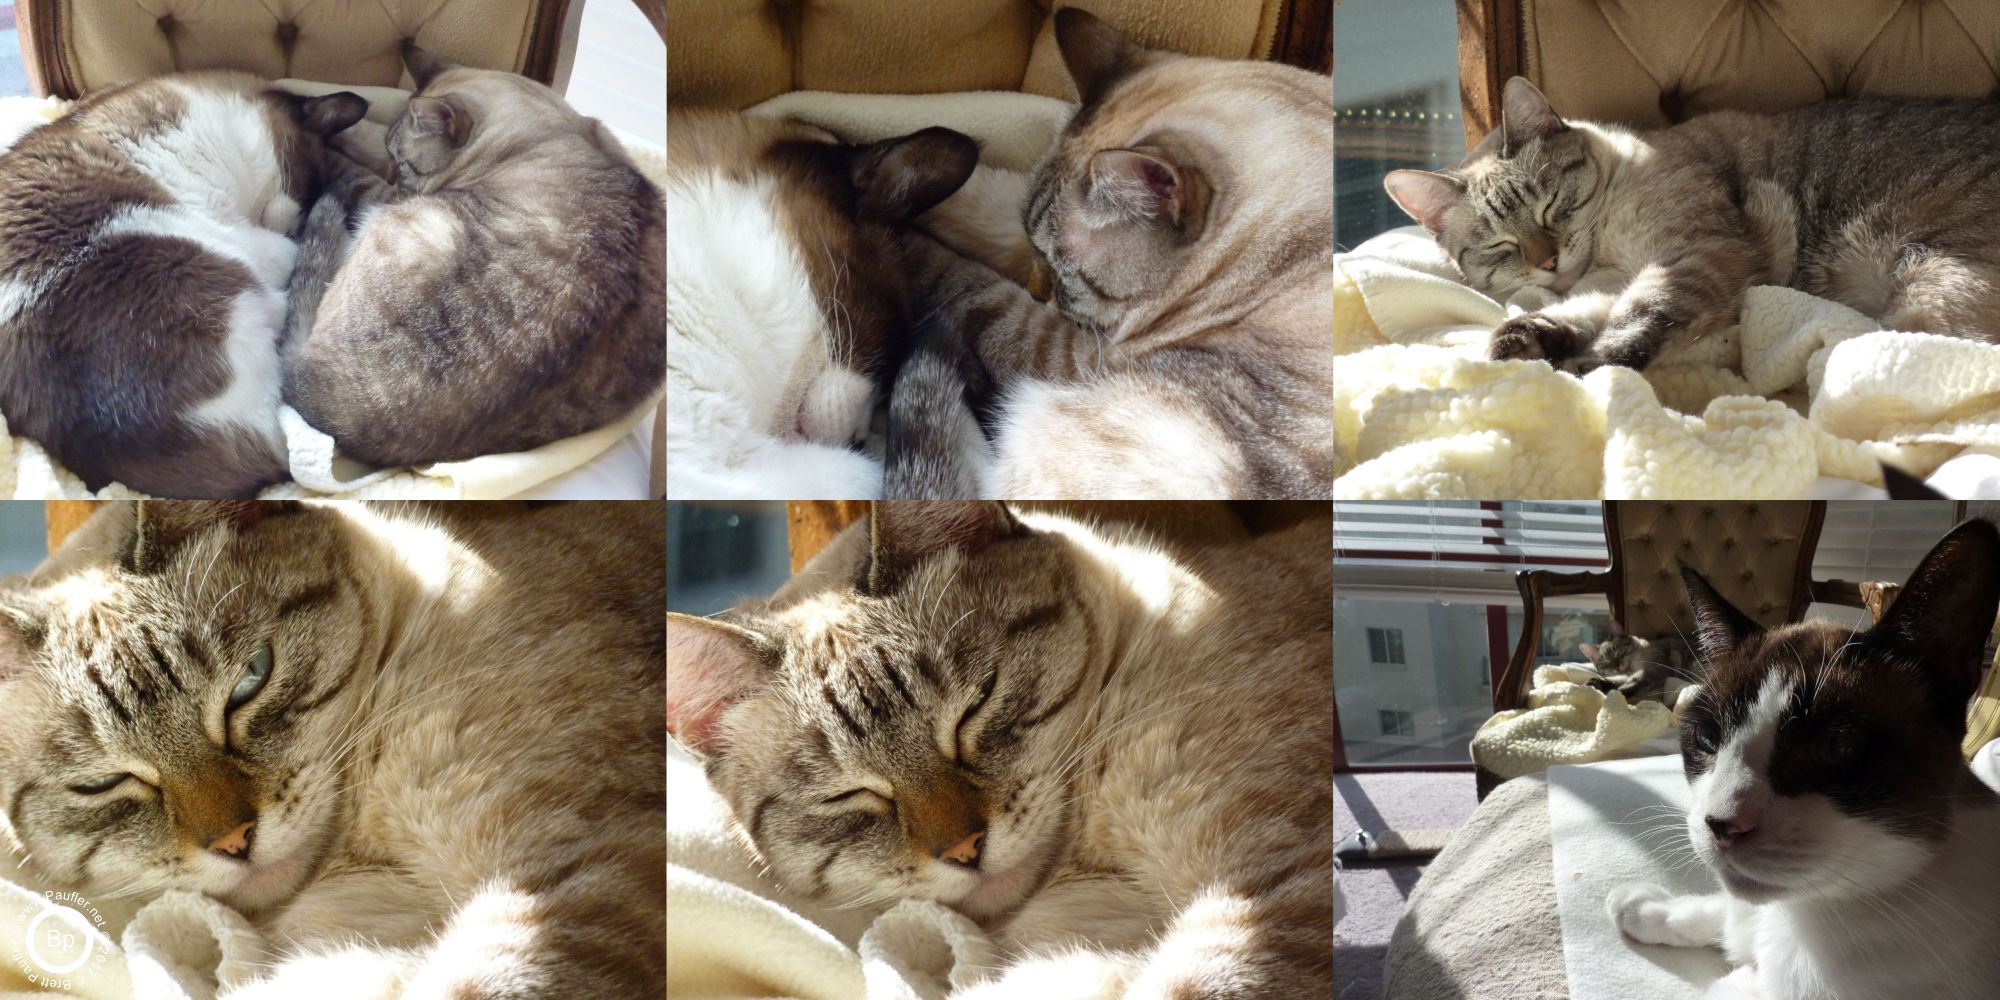 This is a montage image, at one time, I would crunch a bunch of like images together, to save space and organize them, I no longer like this technique, but there is too much info here, two cats sleeping together, to throw out, and I cannot be bothered to split the six images apart